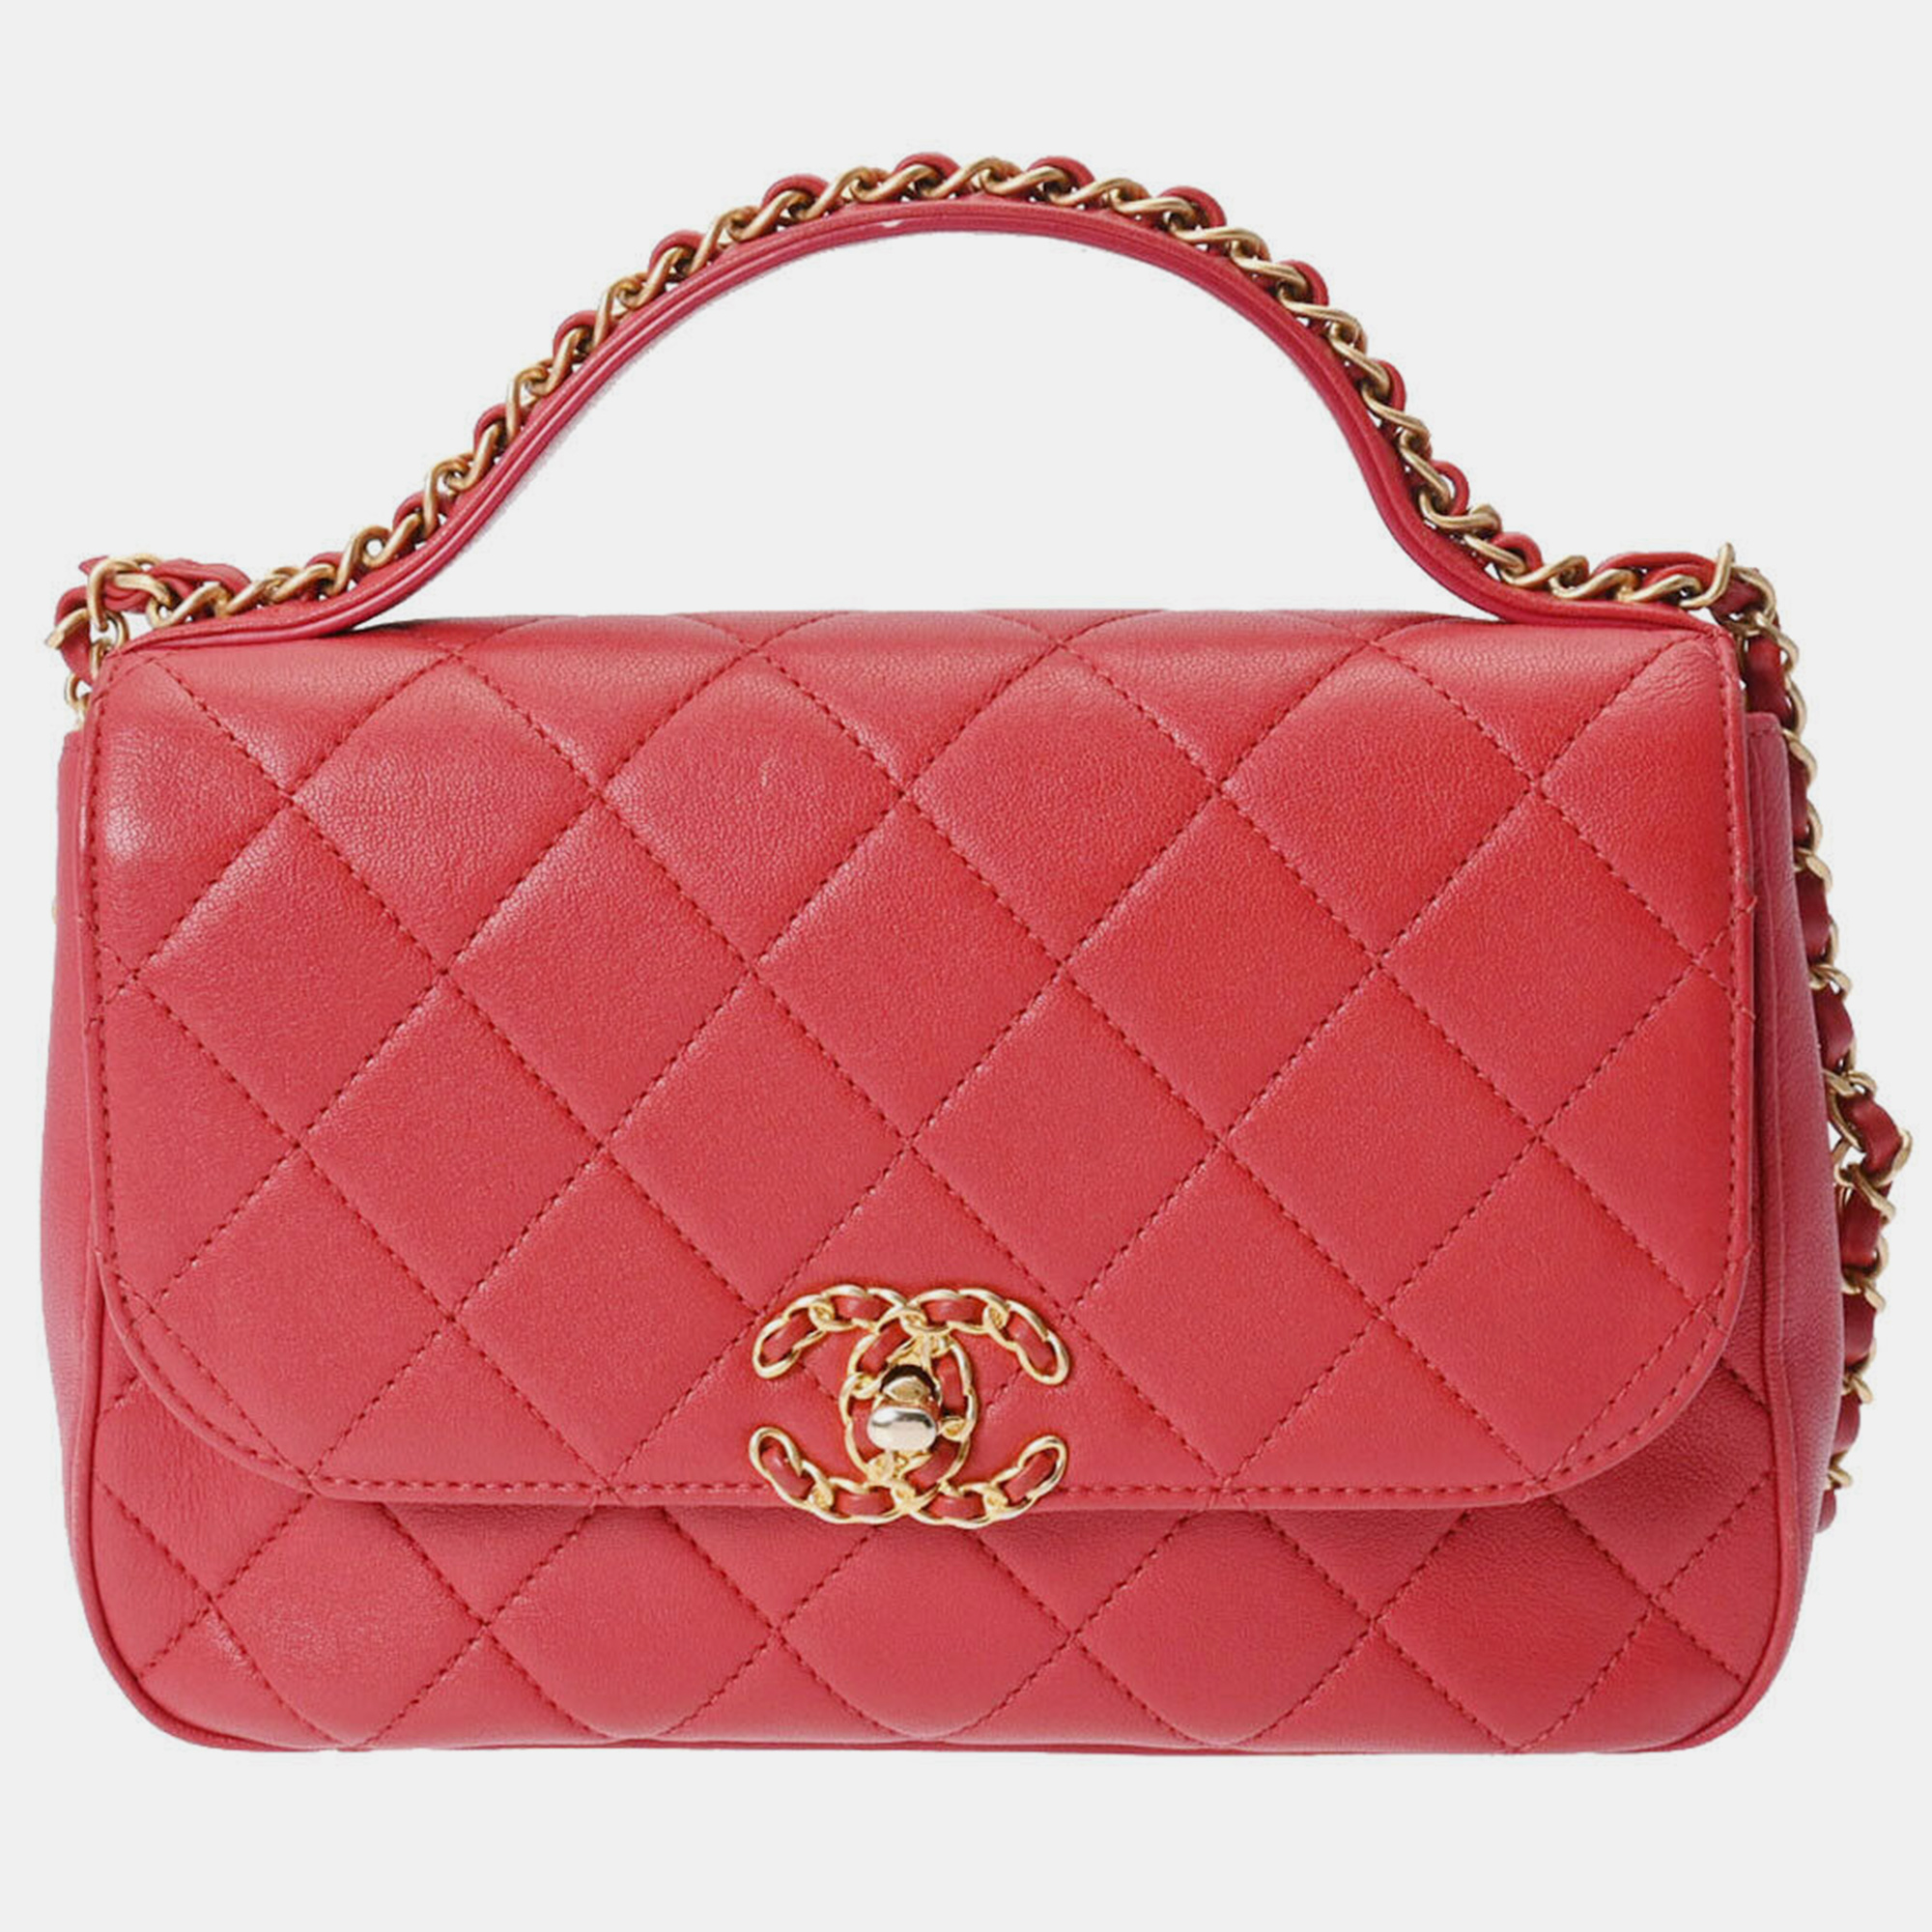 Chanel red leather coco top handle bag